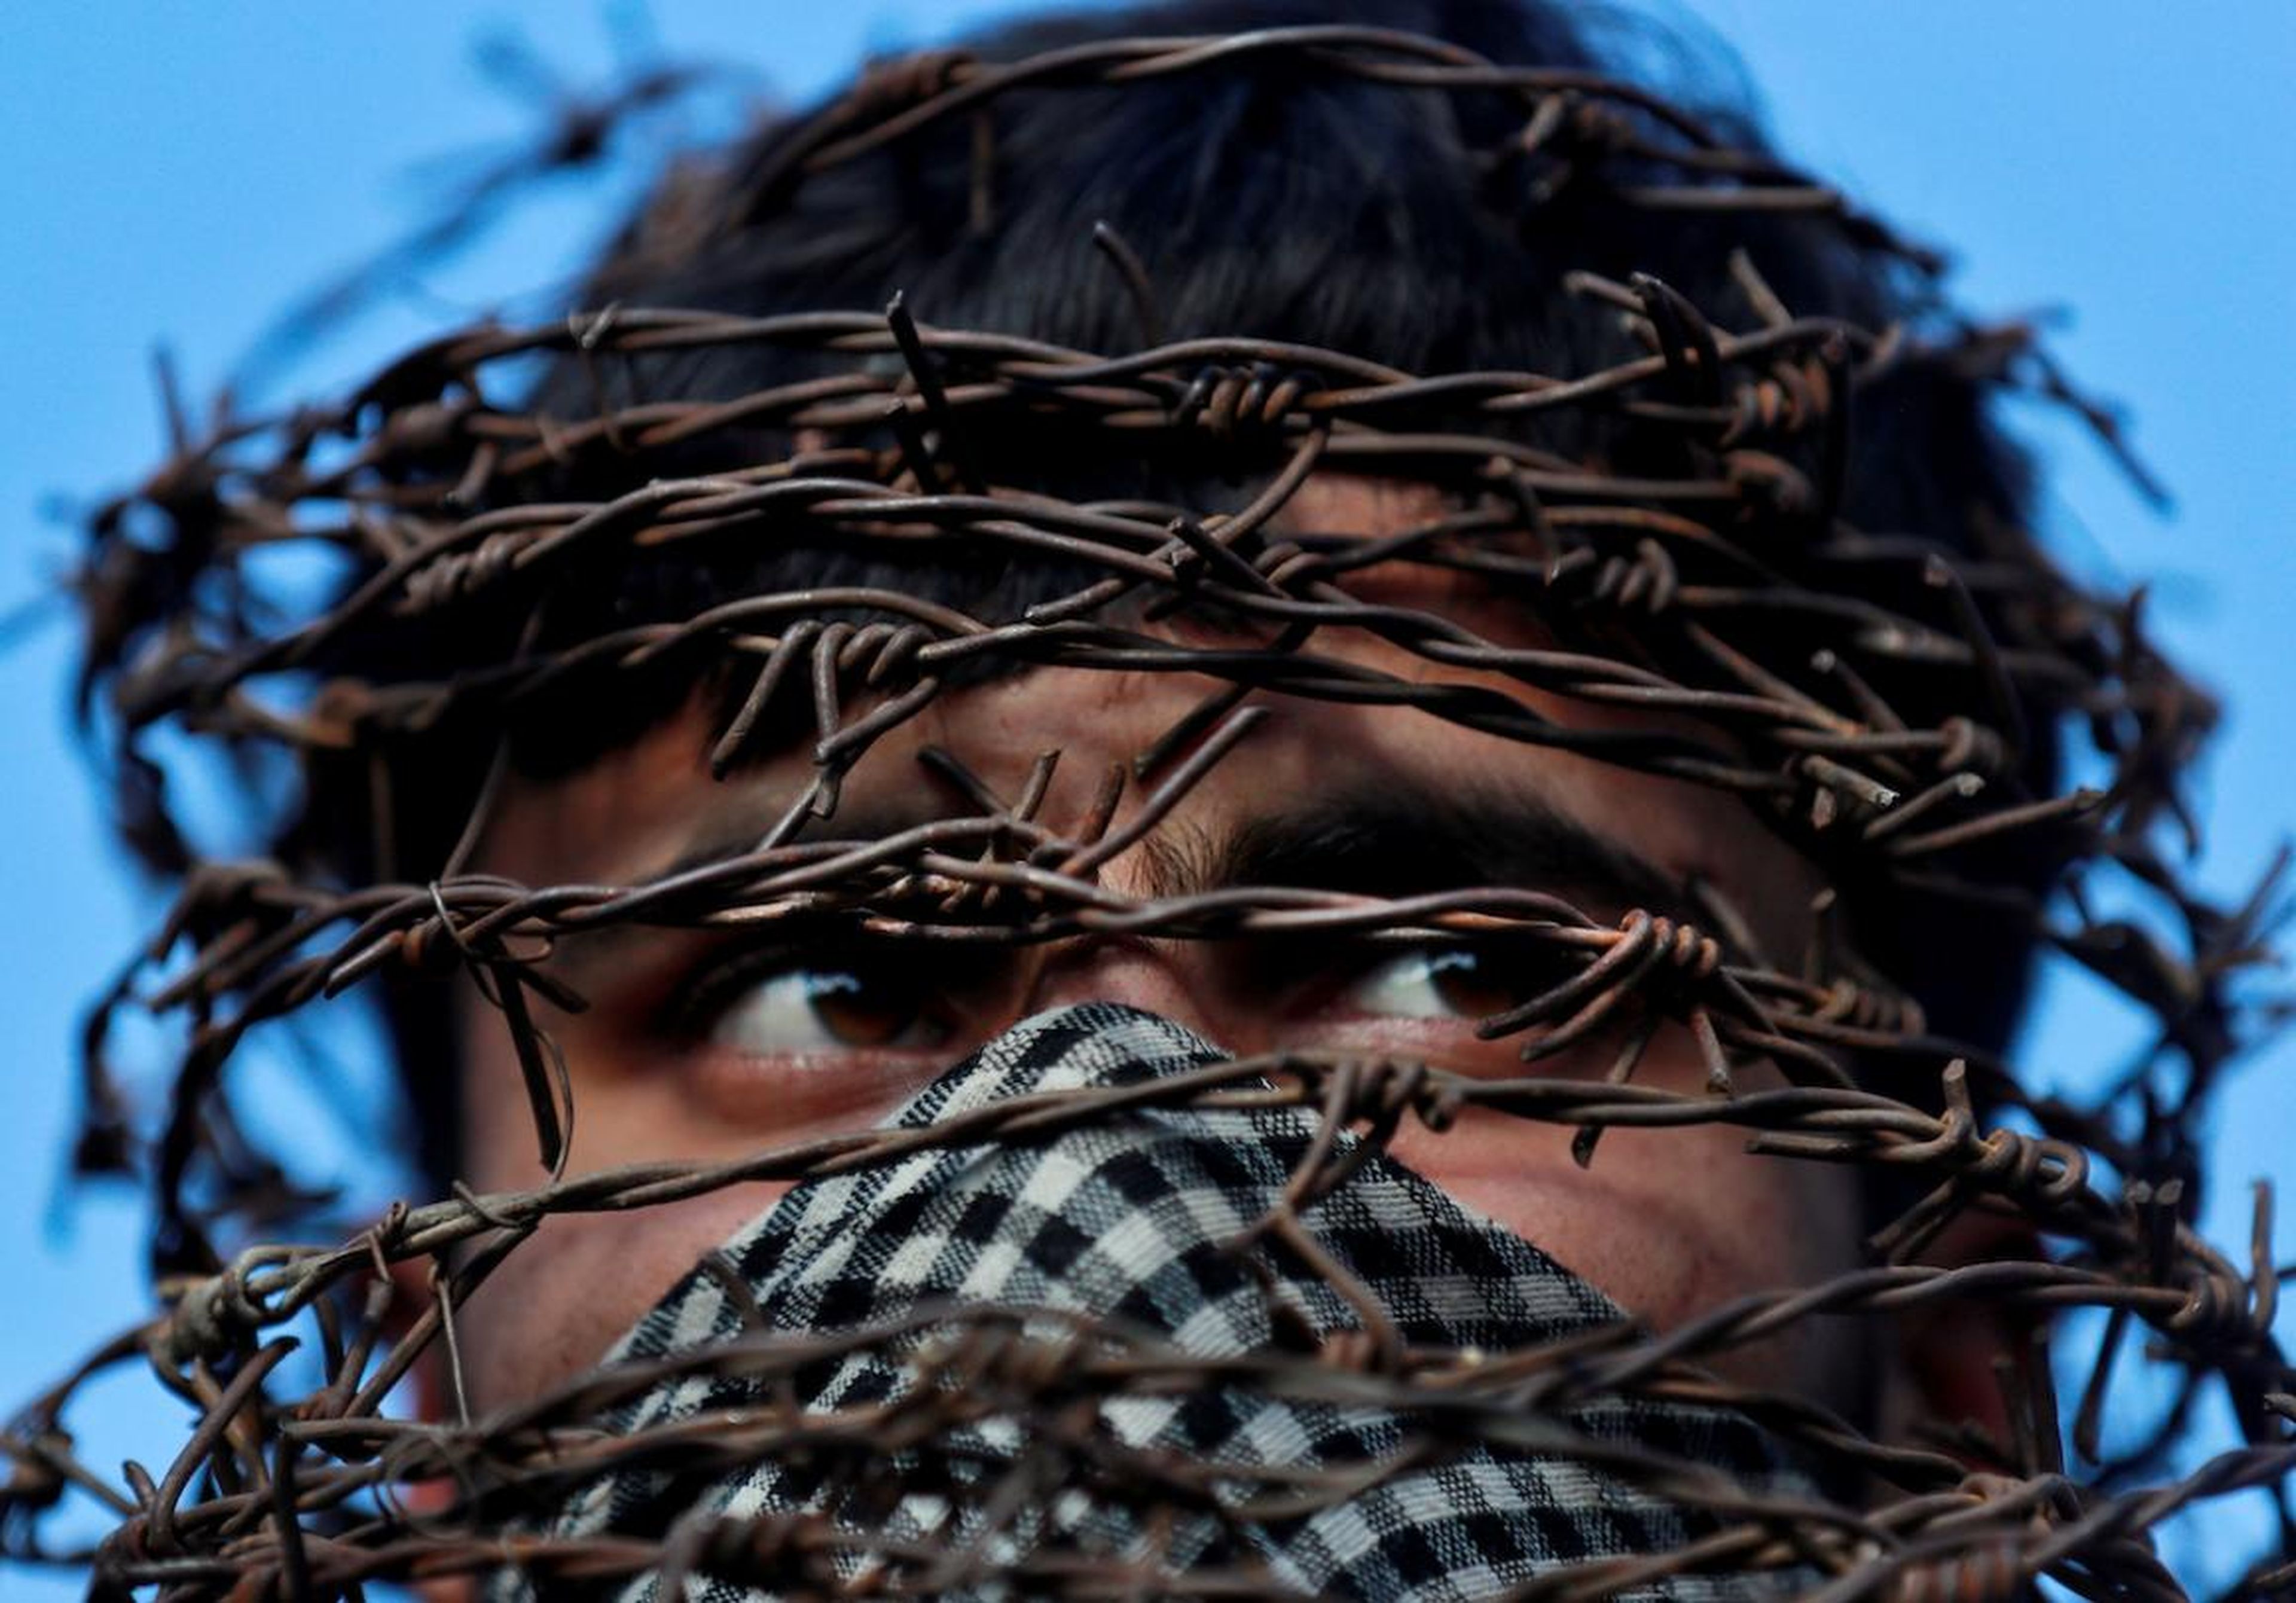 On October 11, a masked Kashmiri man with his head covered with barbed wire attends a protest after Friday prayers during restrictions following the Indian government's scrapping of the special constitutional status for Kashmir in